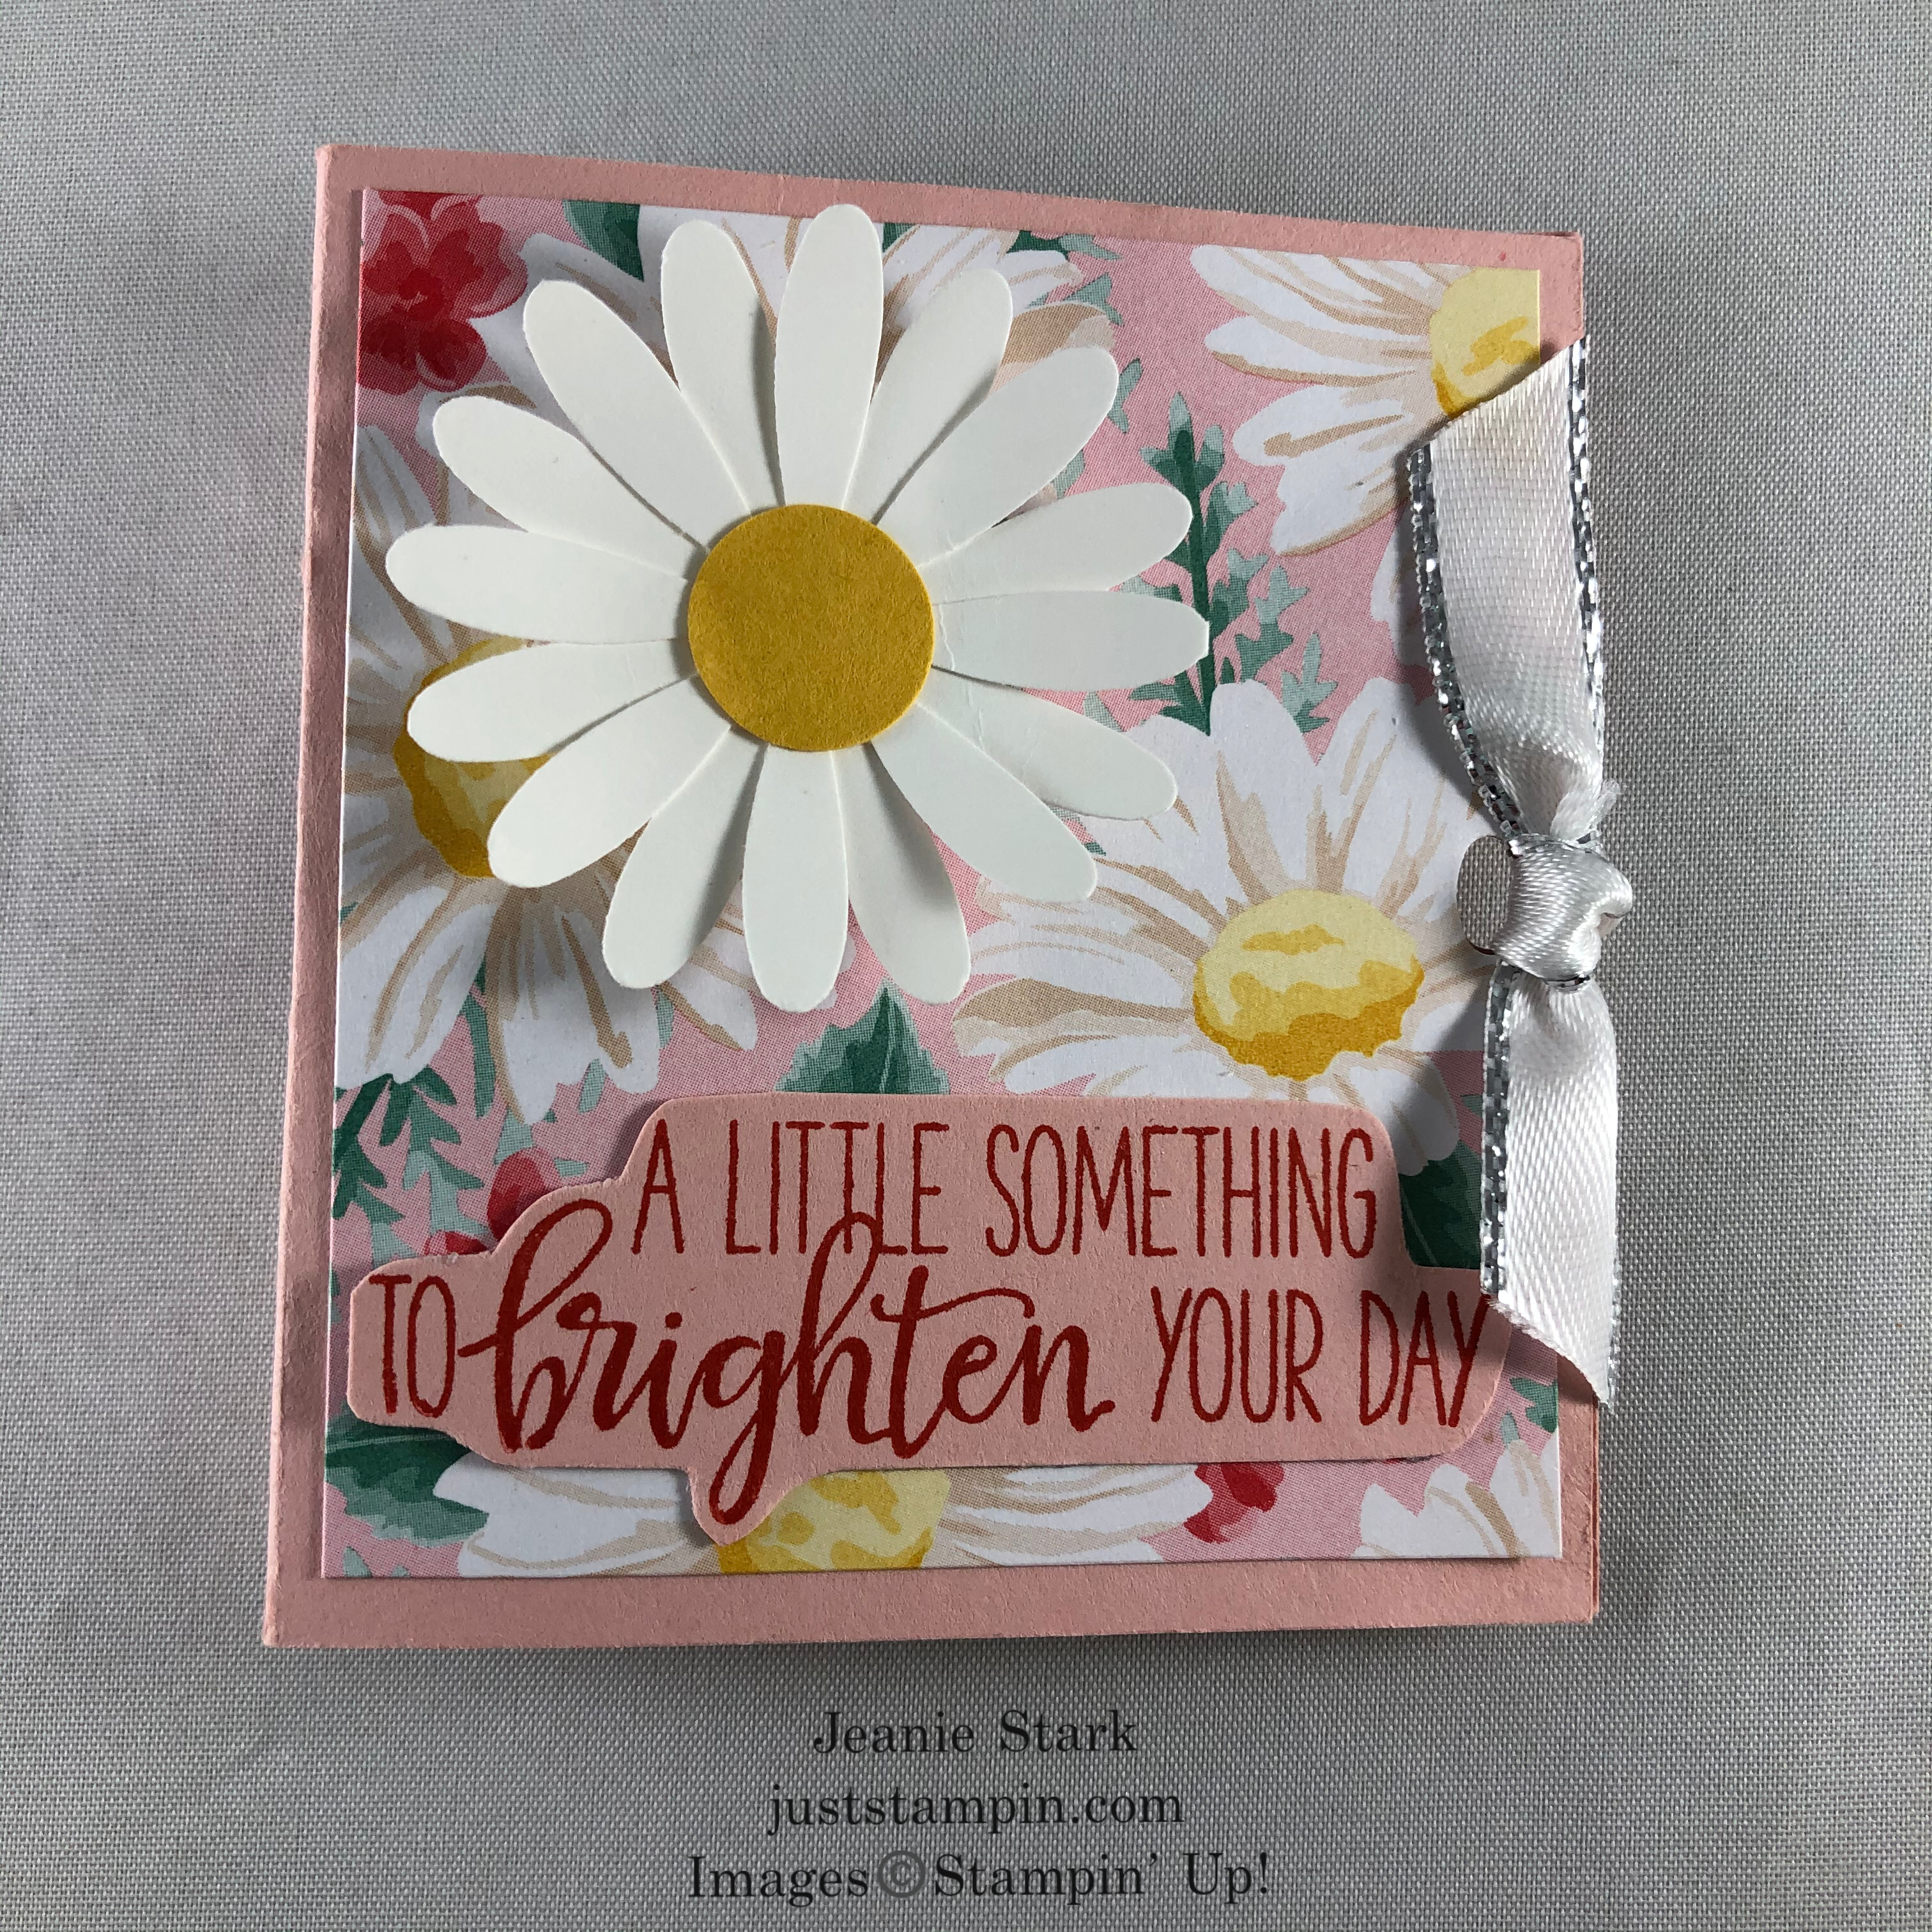 Stampin' Up! Paper Pumpkin Box of Sunshine stamp set with Daisy punch and Flowers for Every Season lip balm holder - Jeanie Stark StampinUp